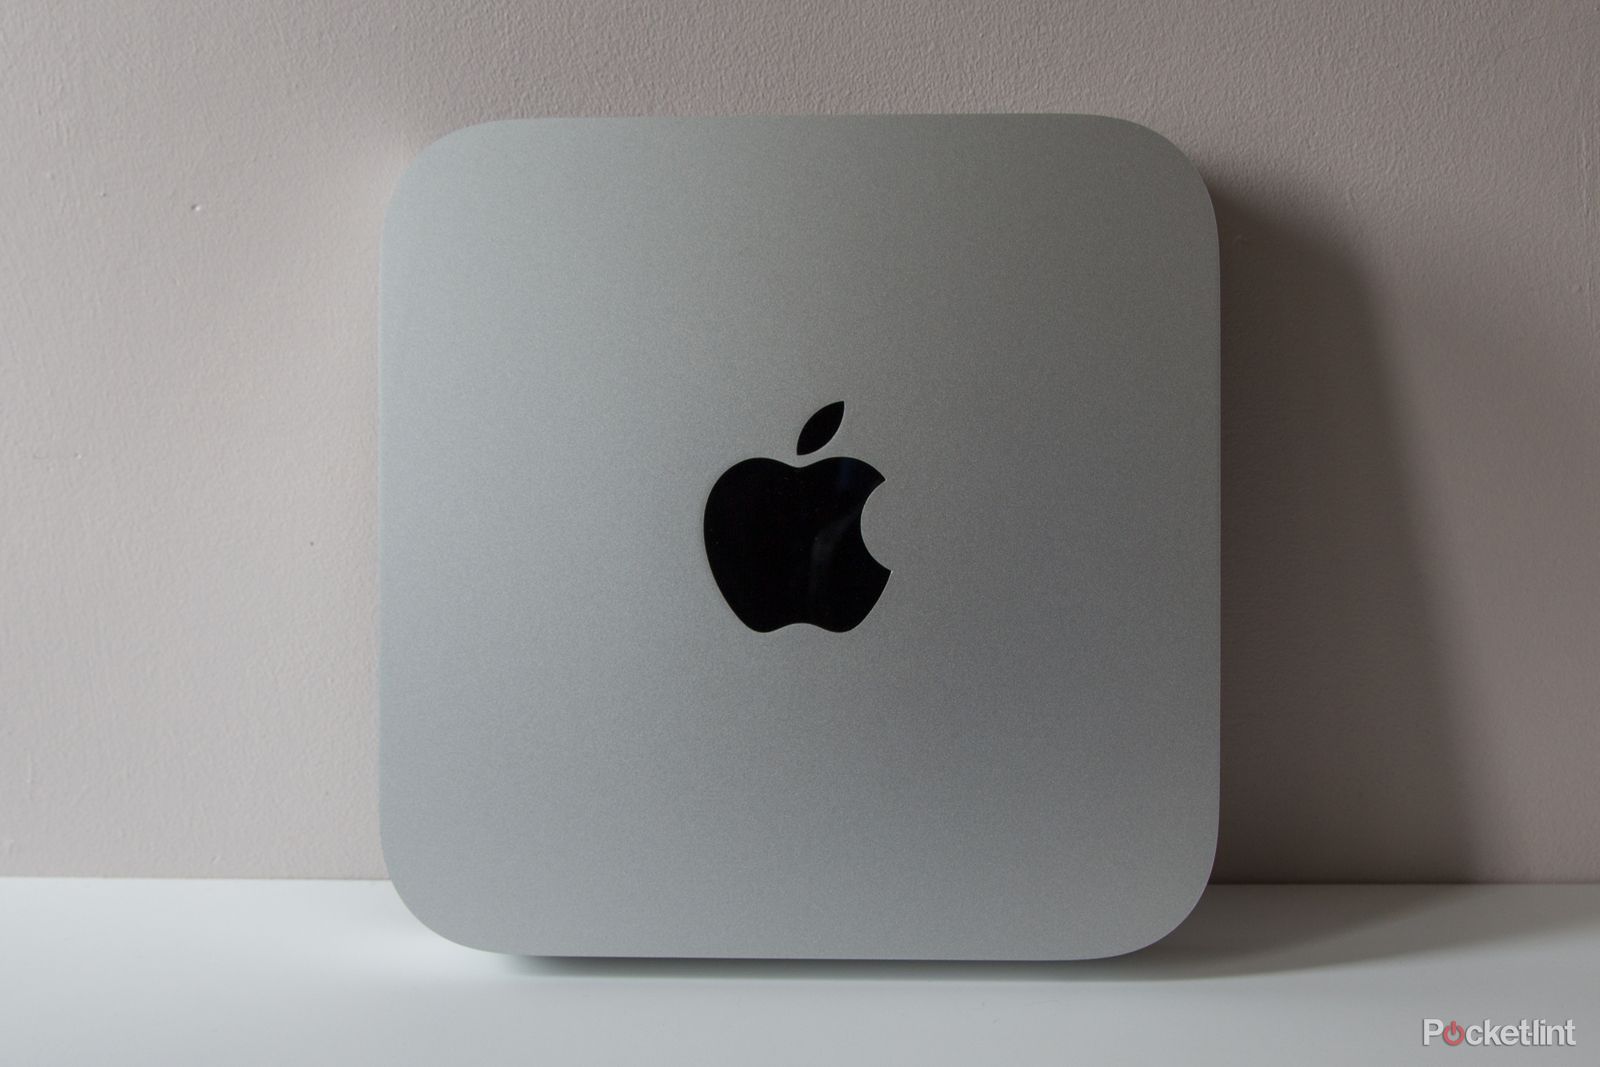 Apple Mac mini (Late 2014) review: Updated, if not upgraded